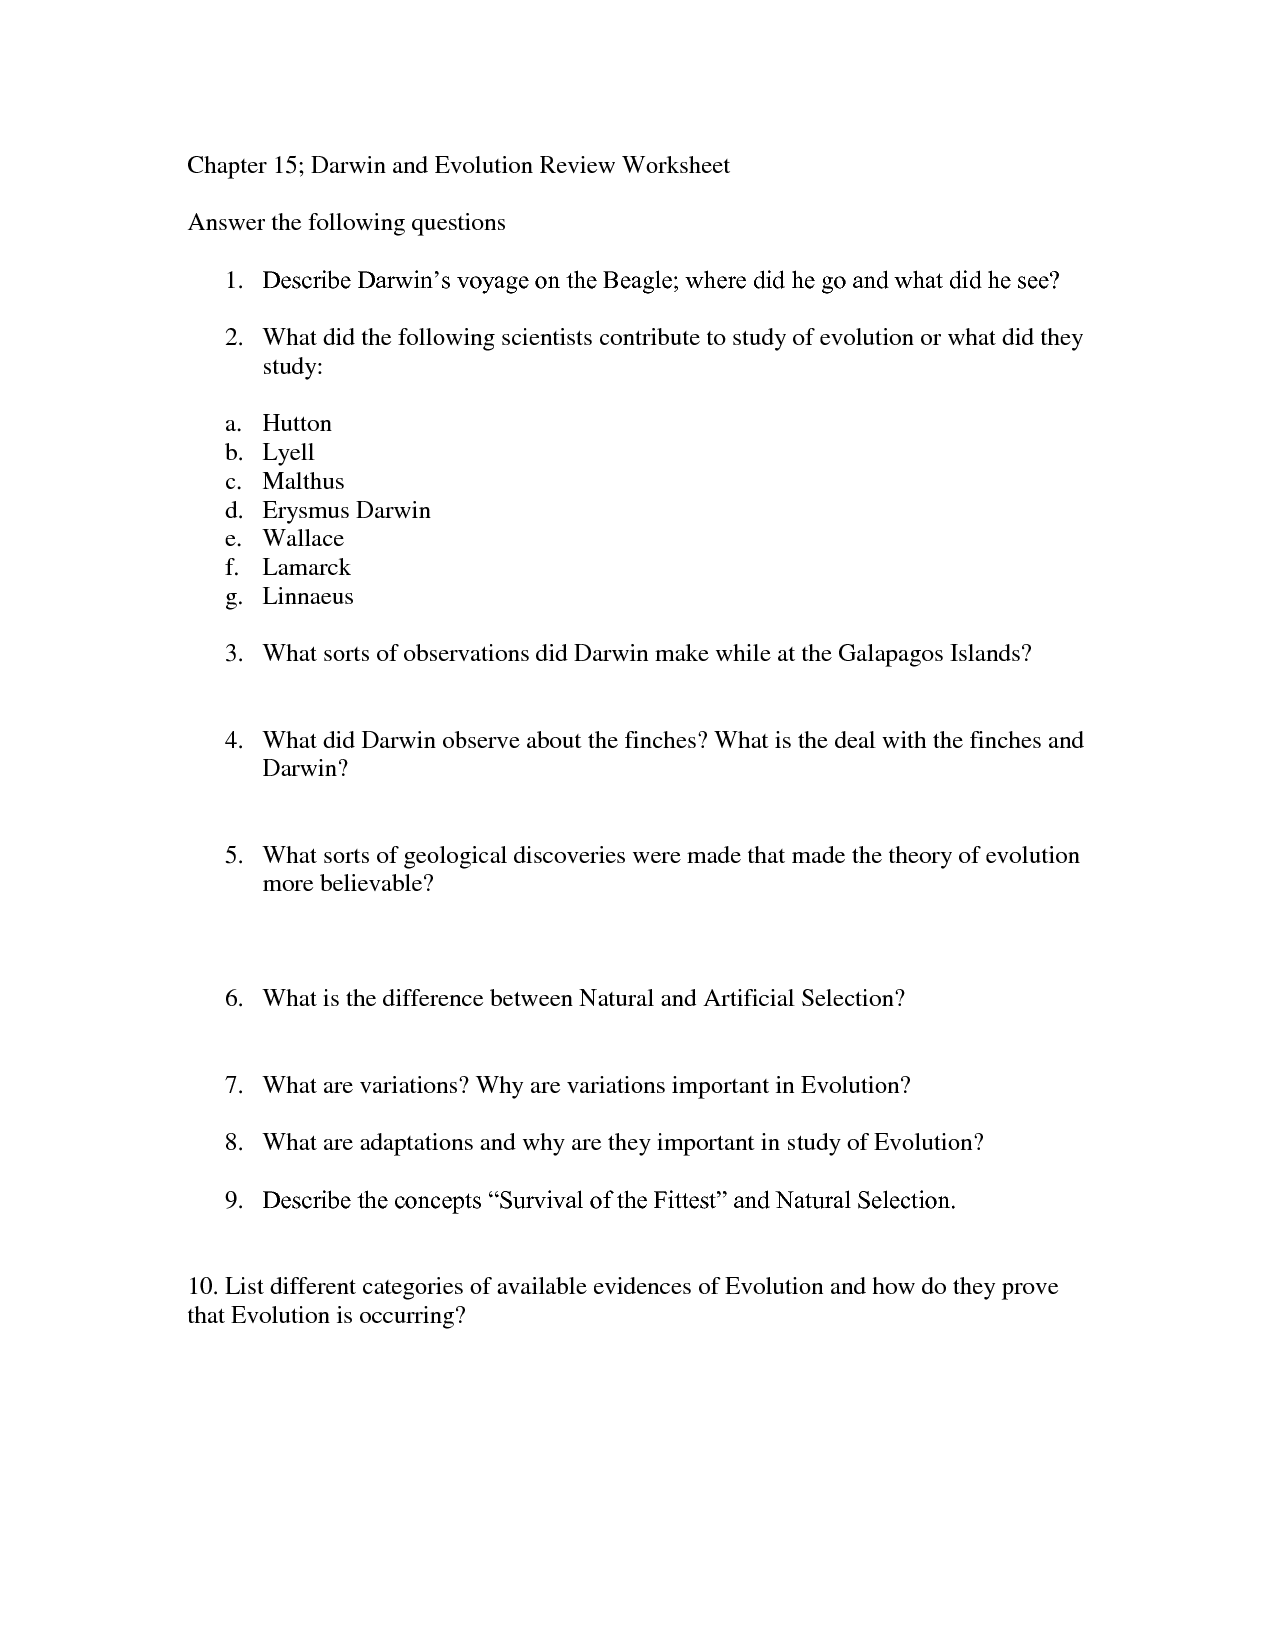 12-best-images-of-evolution-worksheet-with-answer-key-theory-of-evolution-worksheet-answer-key